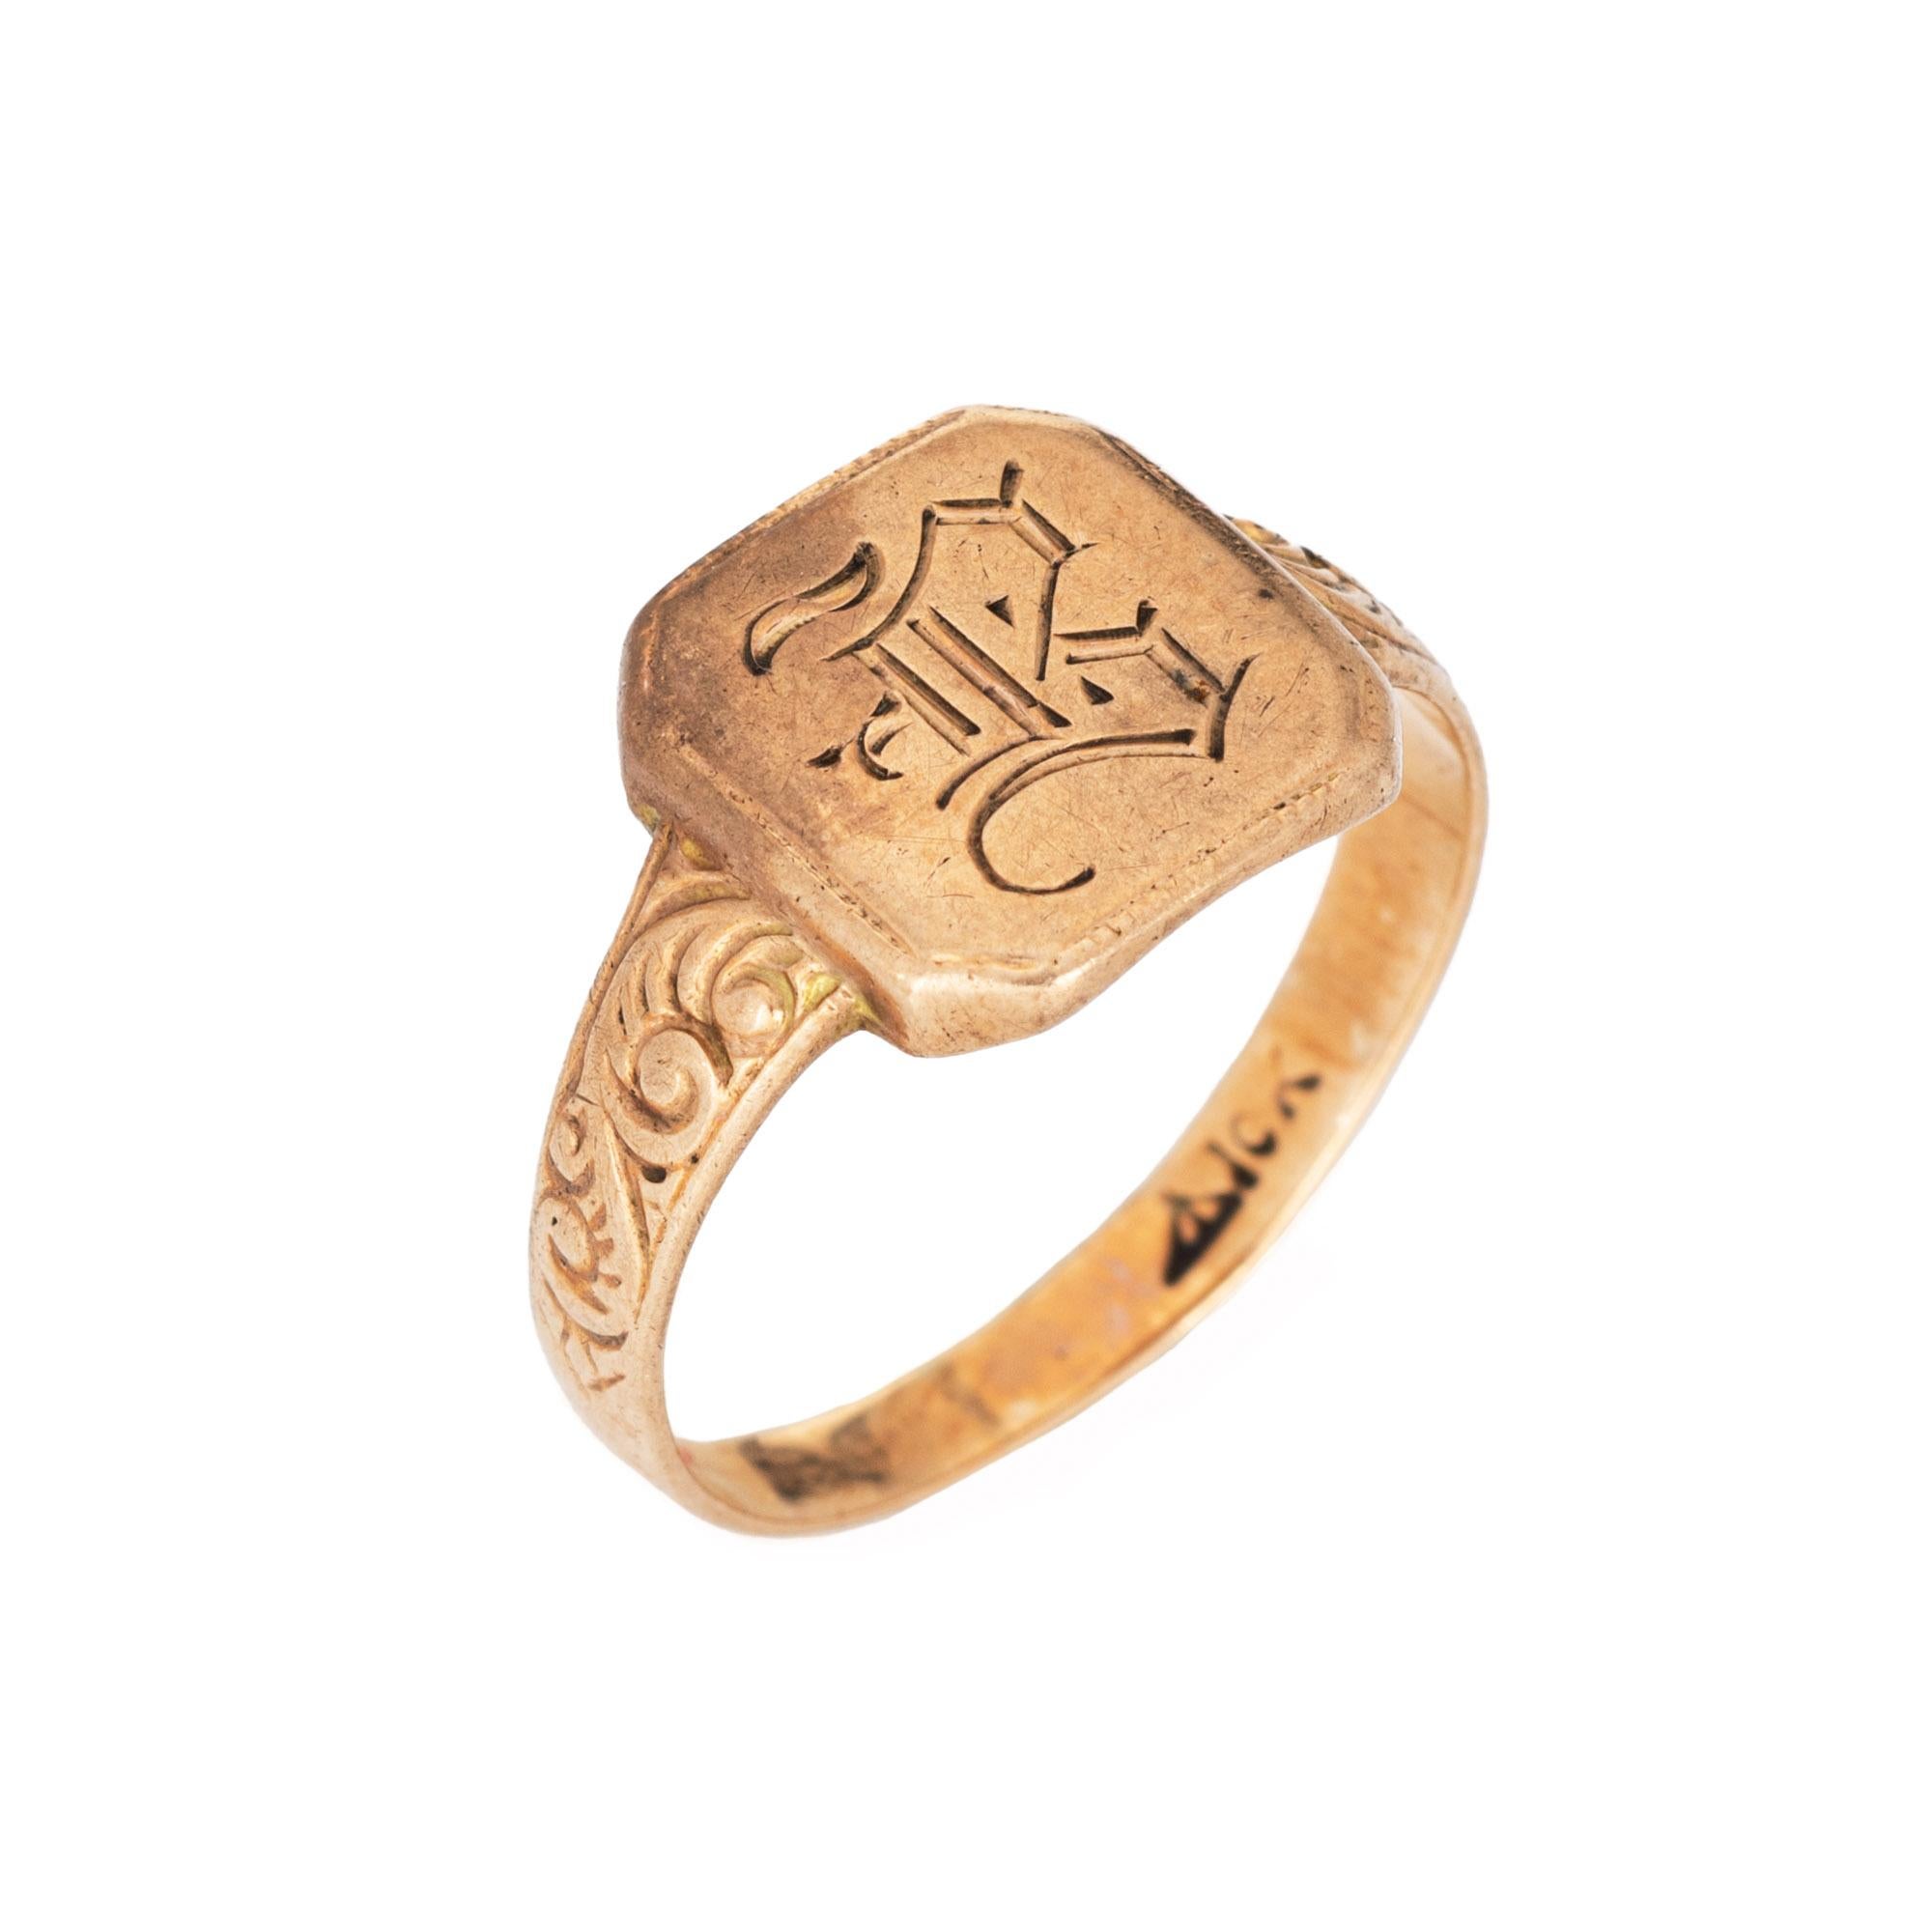 Lovely antique Victorian signet ring (circa 1880s to 1900s), crafted in 10 karat yellow gold. 

The center mount is engraved with the letter 